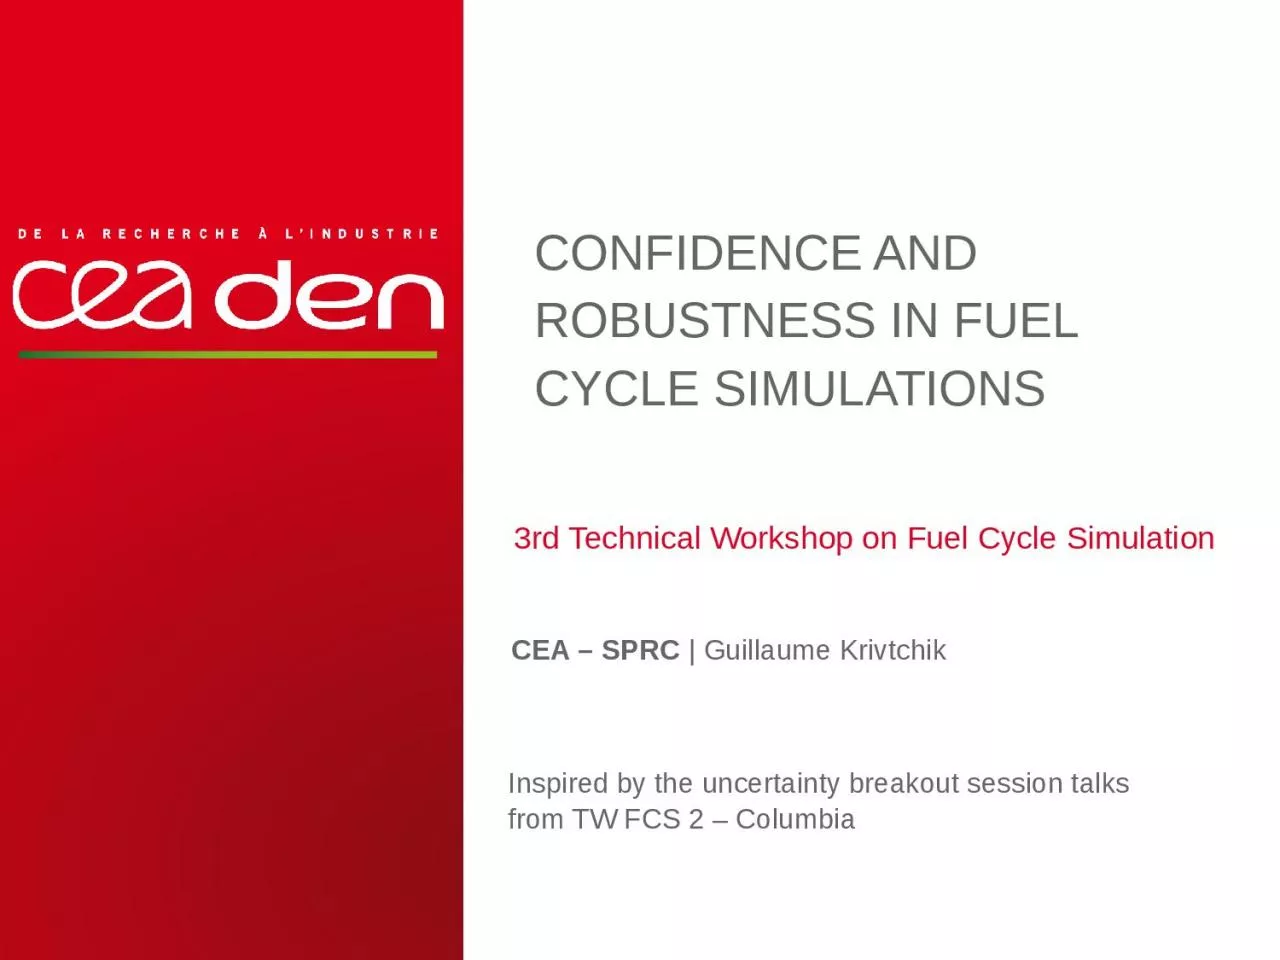 Confidence and robustness in fuel cycle simulations